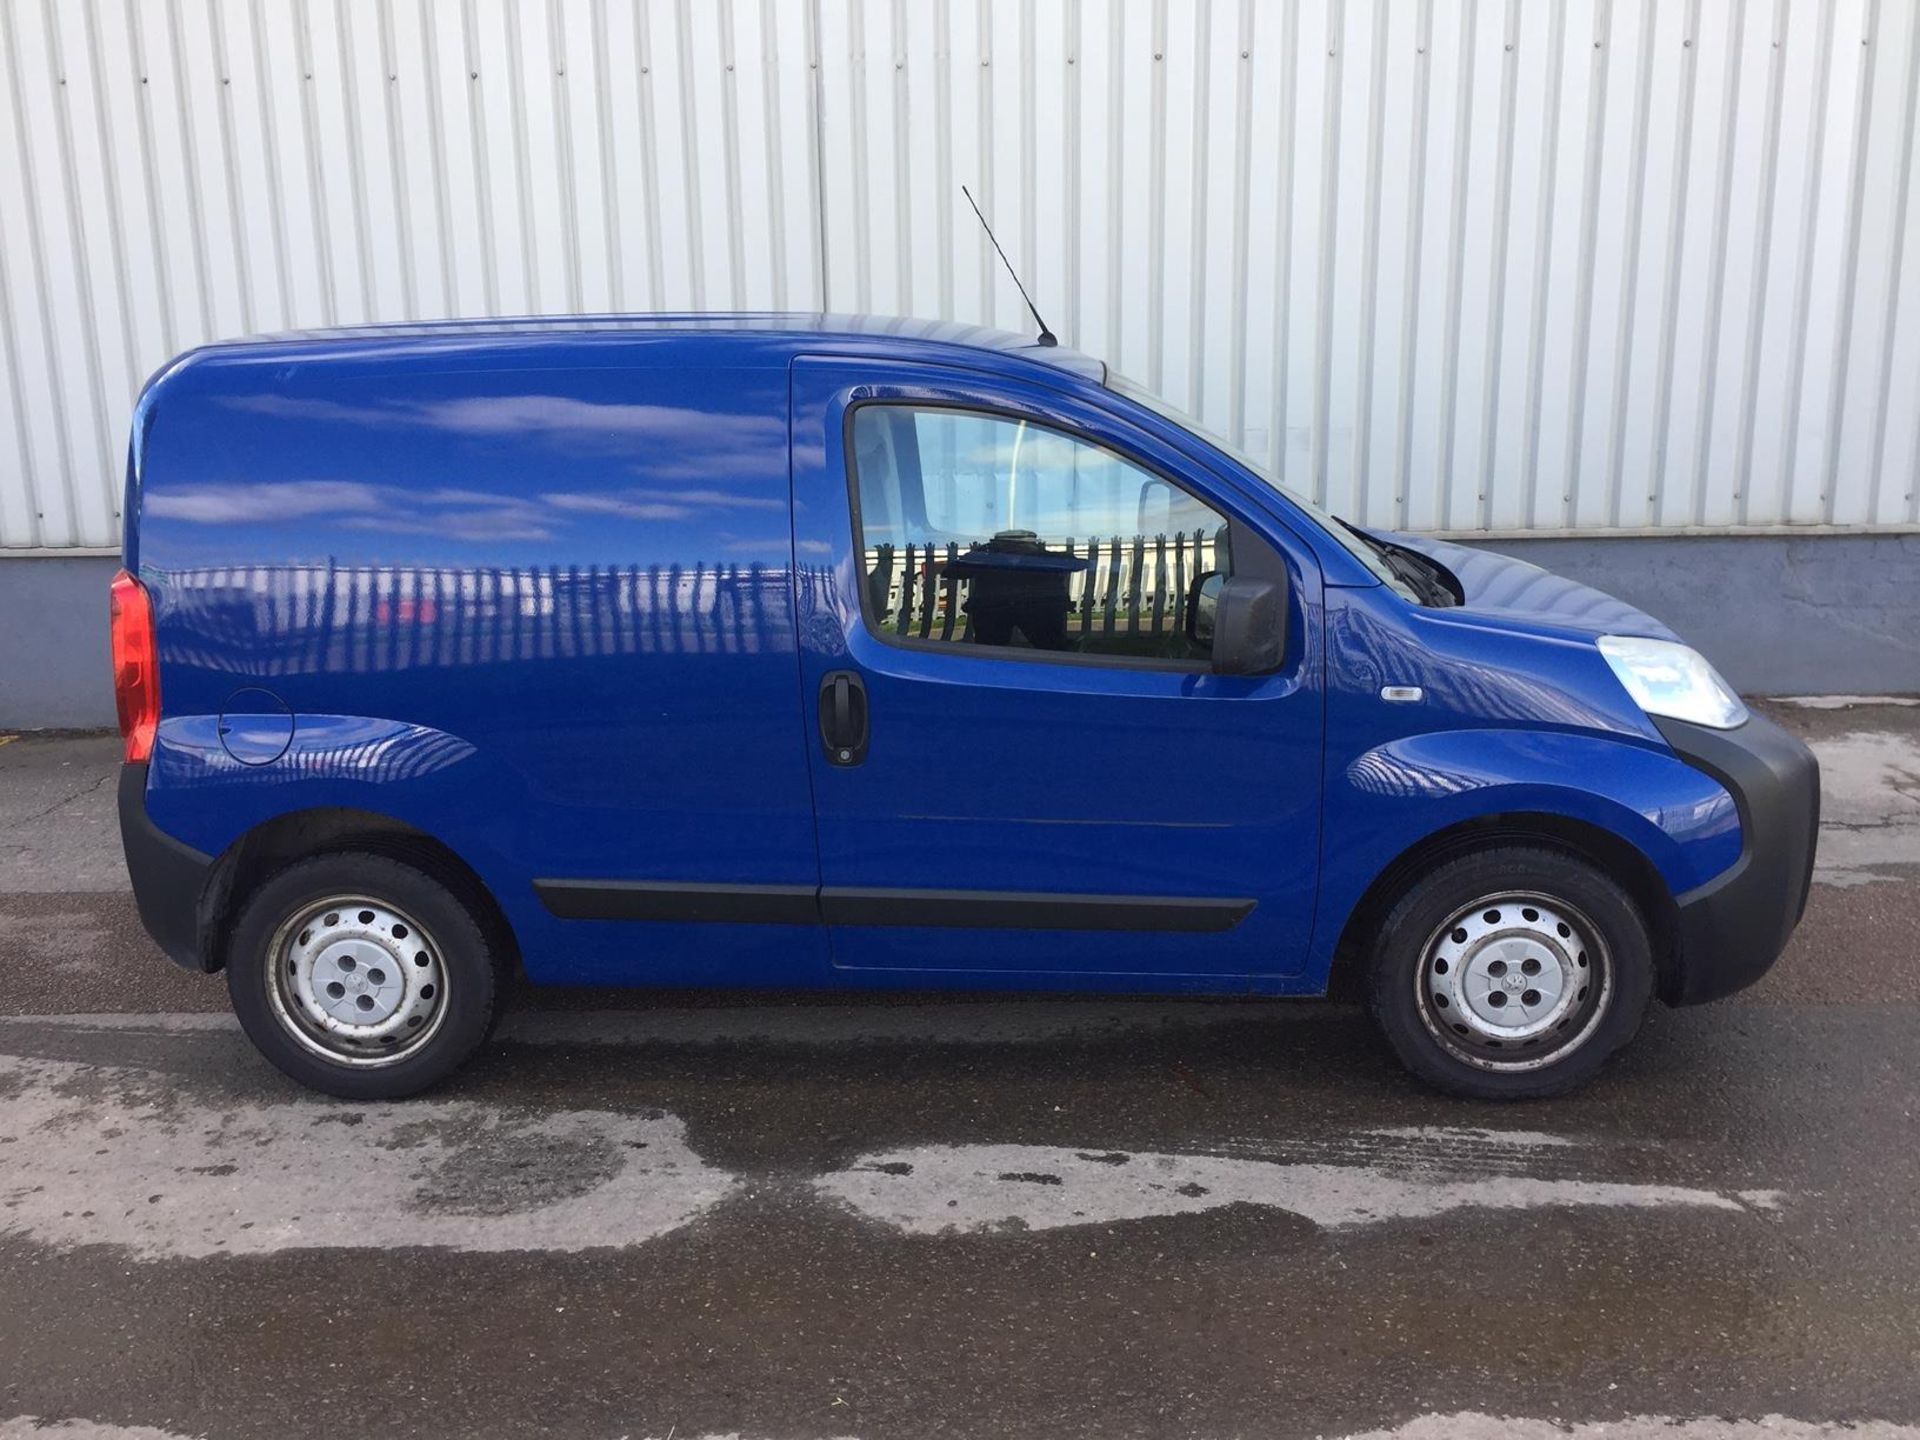 2014 Peugeot Bipper 1.3 Hdi S 4 Dr Panel Van - CL505 - Location: Corby, Northamptonshire - Image 9 of 12